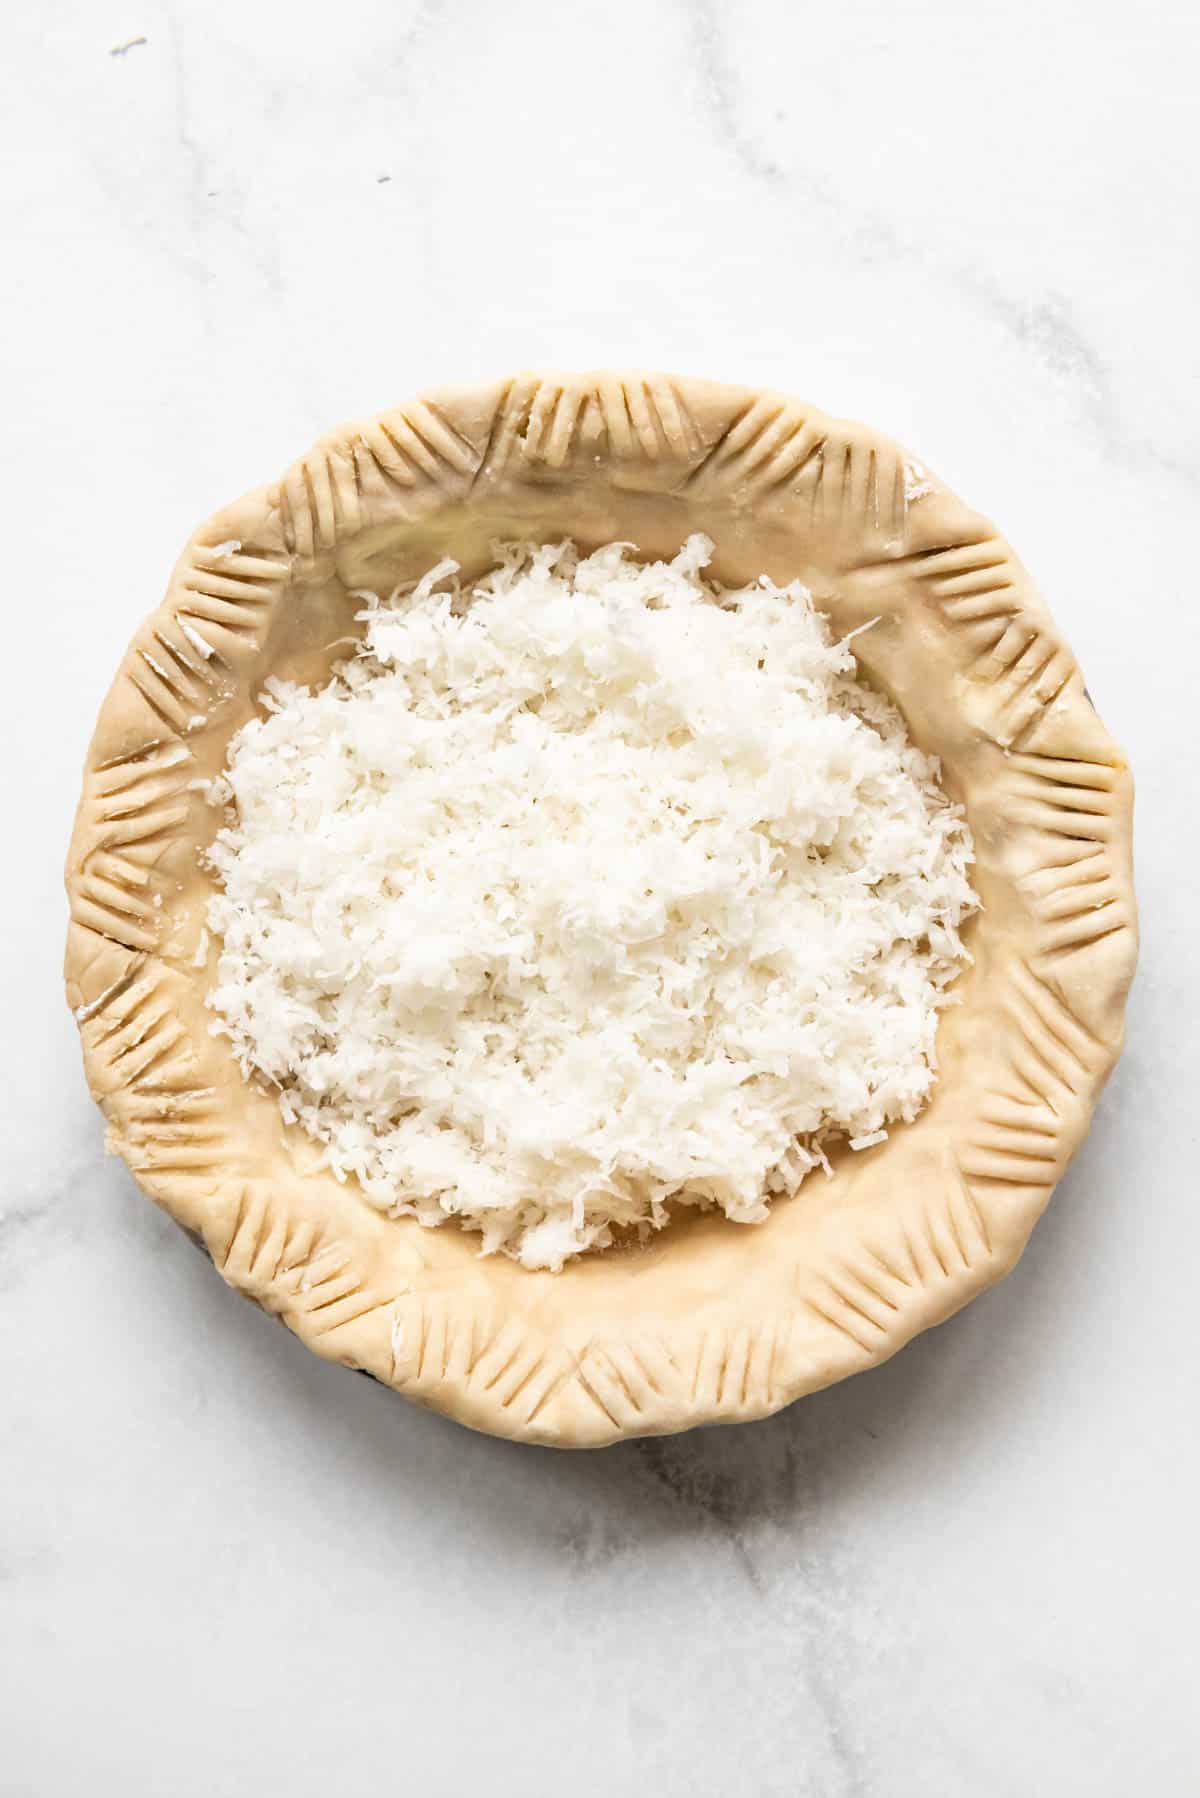 An unbaked pie crust filled with shredded sweetened coconut.